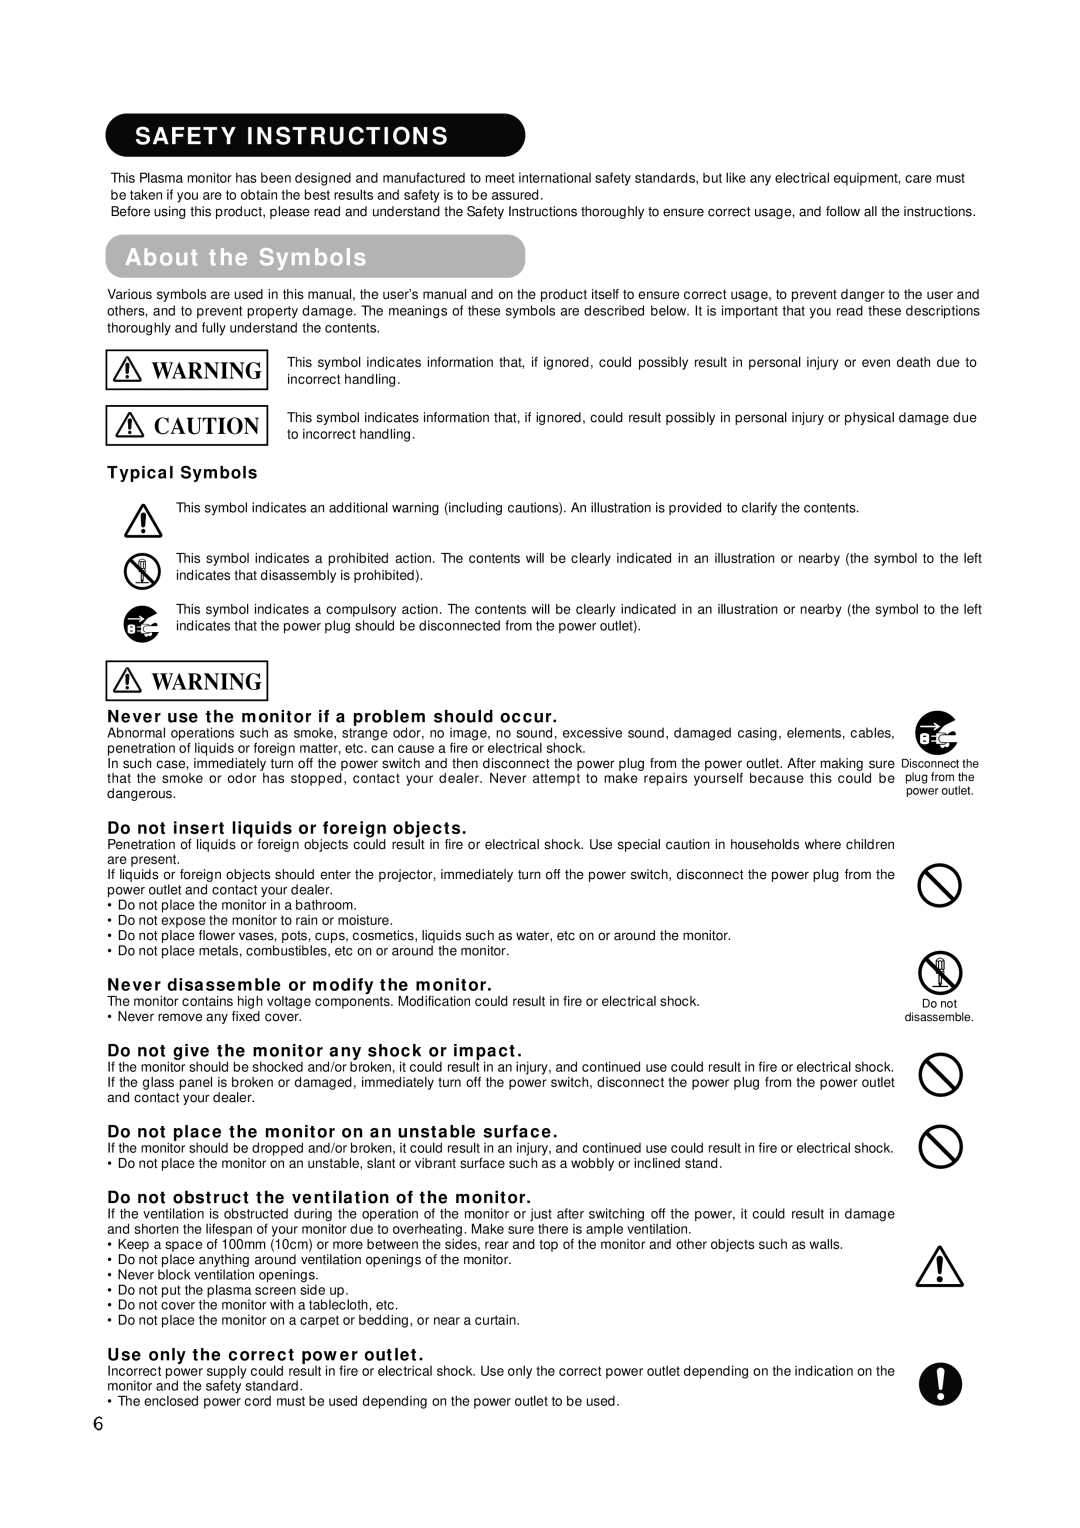 Hitachi PW1A Safety Instructions, About the Symbols, Typical Symbols, Never use the monitor if a problem should occur 